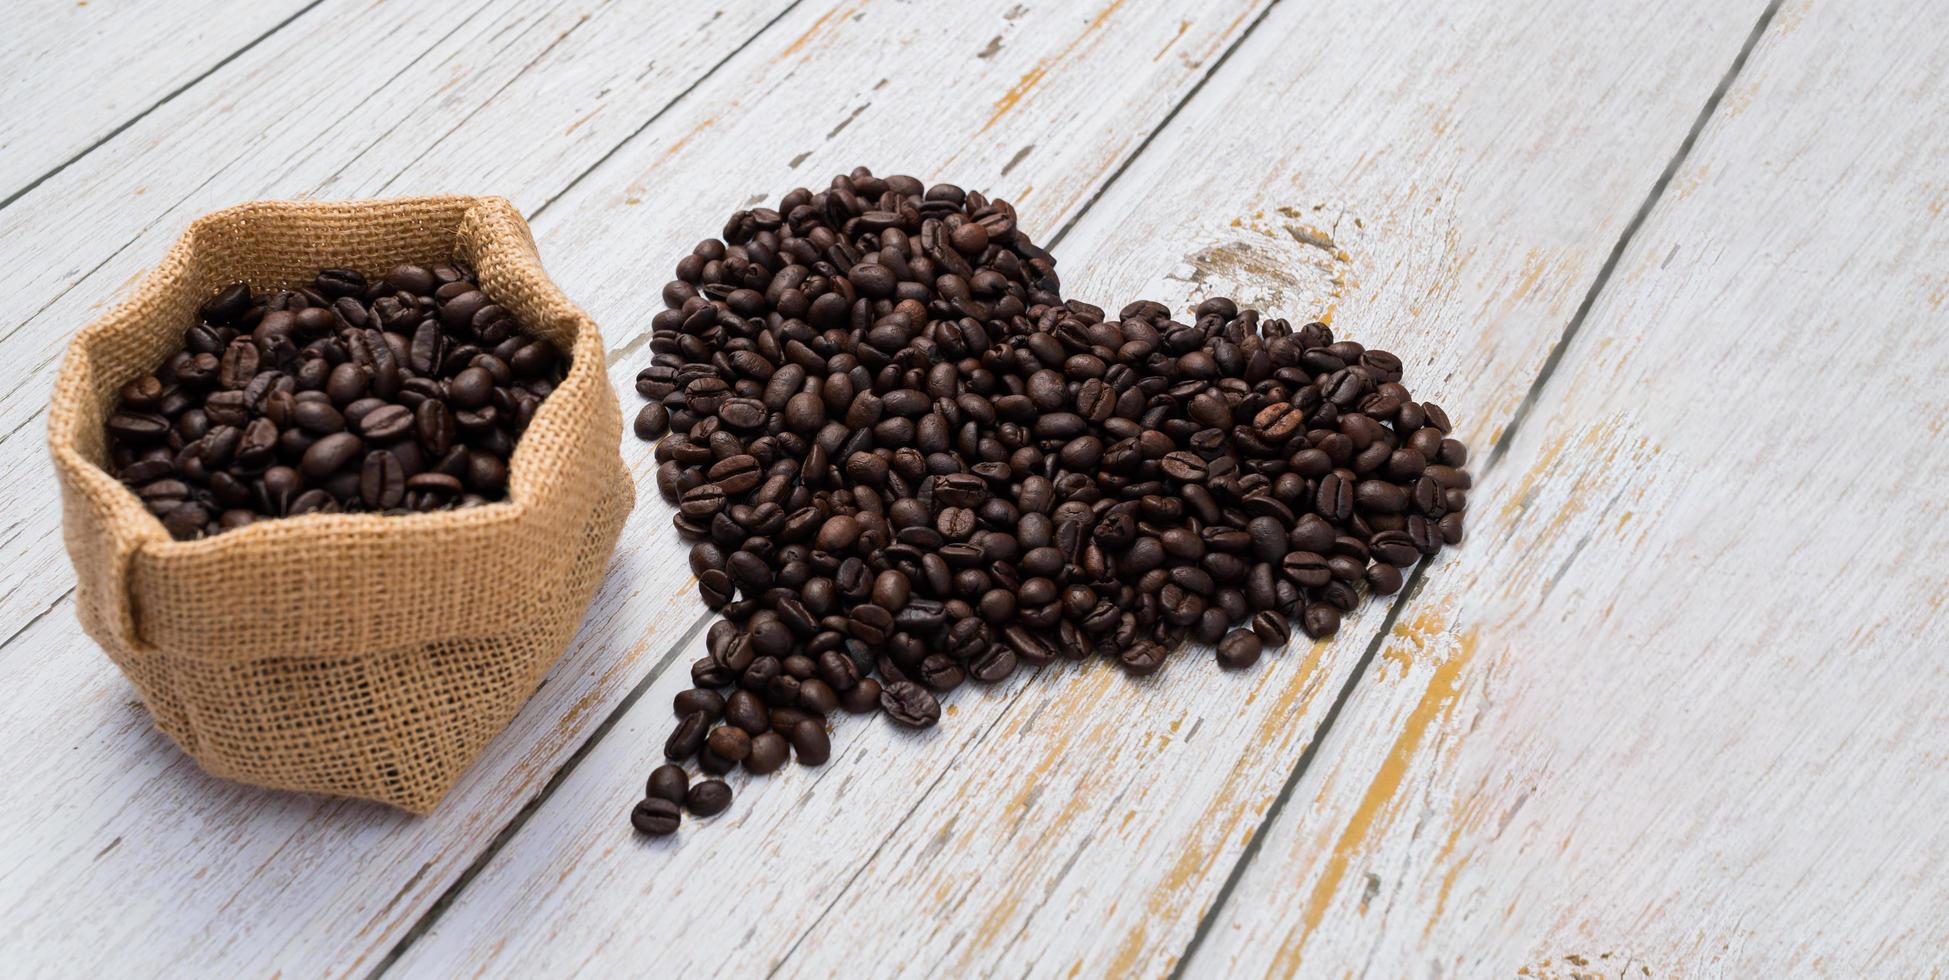 Coffee beans arranged in a heart shape, love drinking coffee concept photo